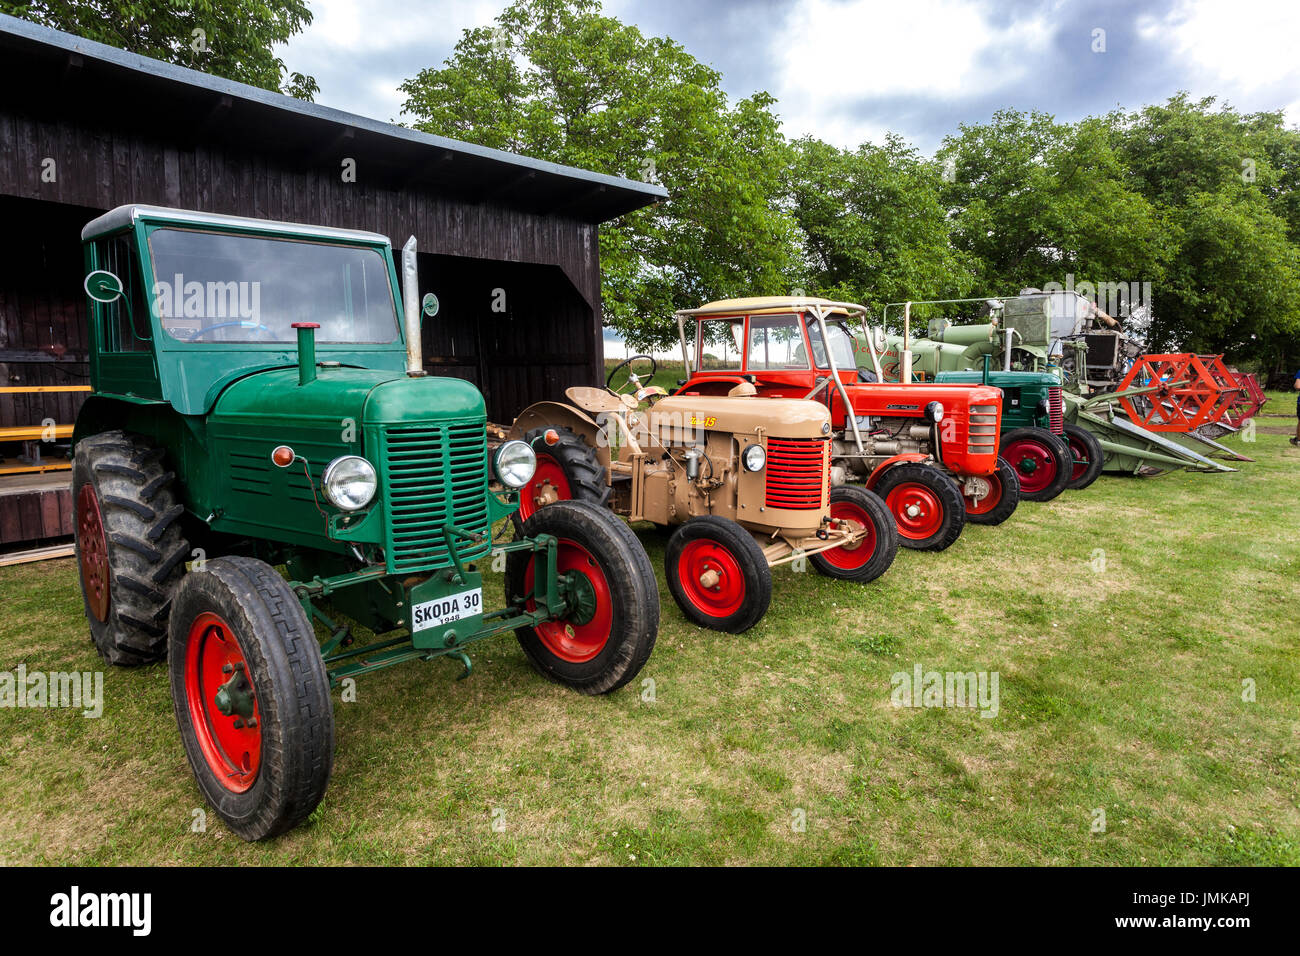 Meeting of old agricultural machinery, tractors Skoda 30 tractor and Zetor, Blazkov, Czech Republic Stock Photo